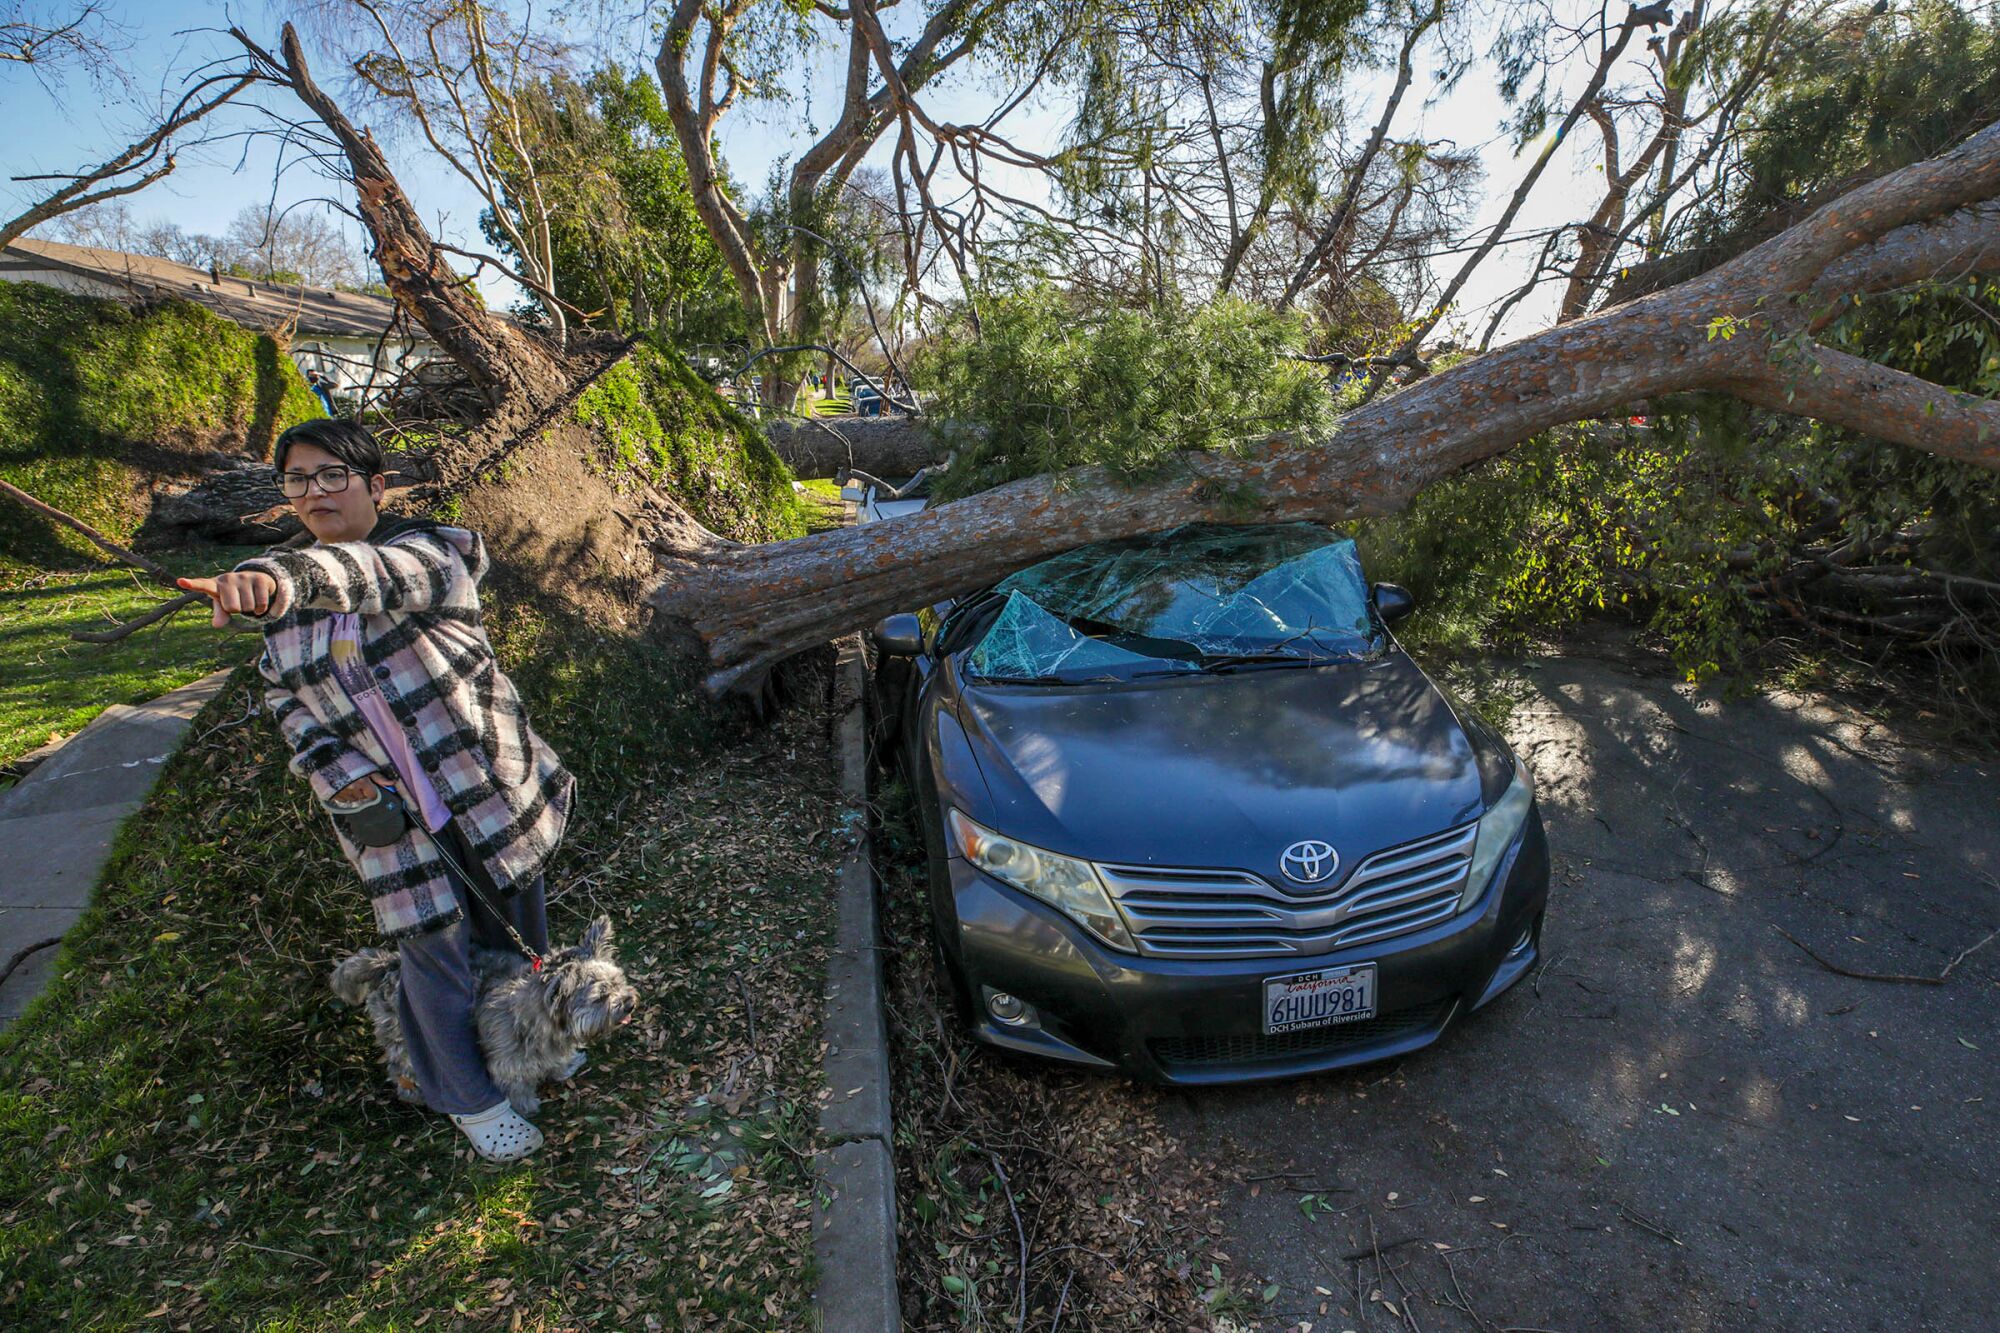 Ivette Crenshaw — shown with her dog, Kiba — had her car crushed under a fallen tree Saturday on 11th Street in Upland.